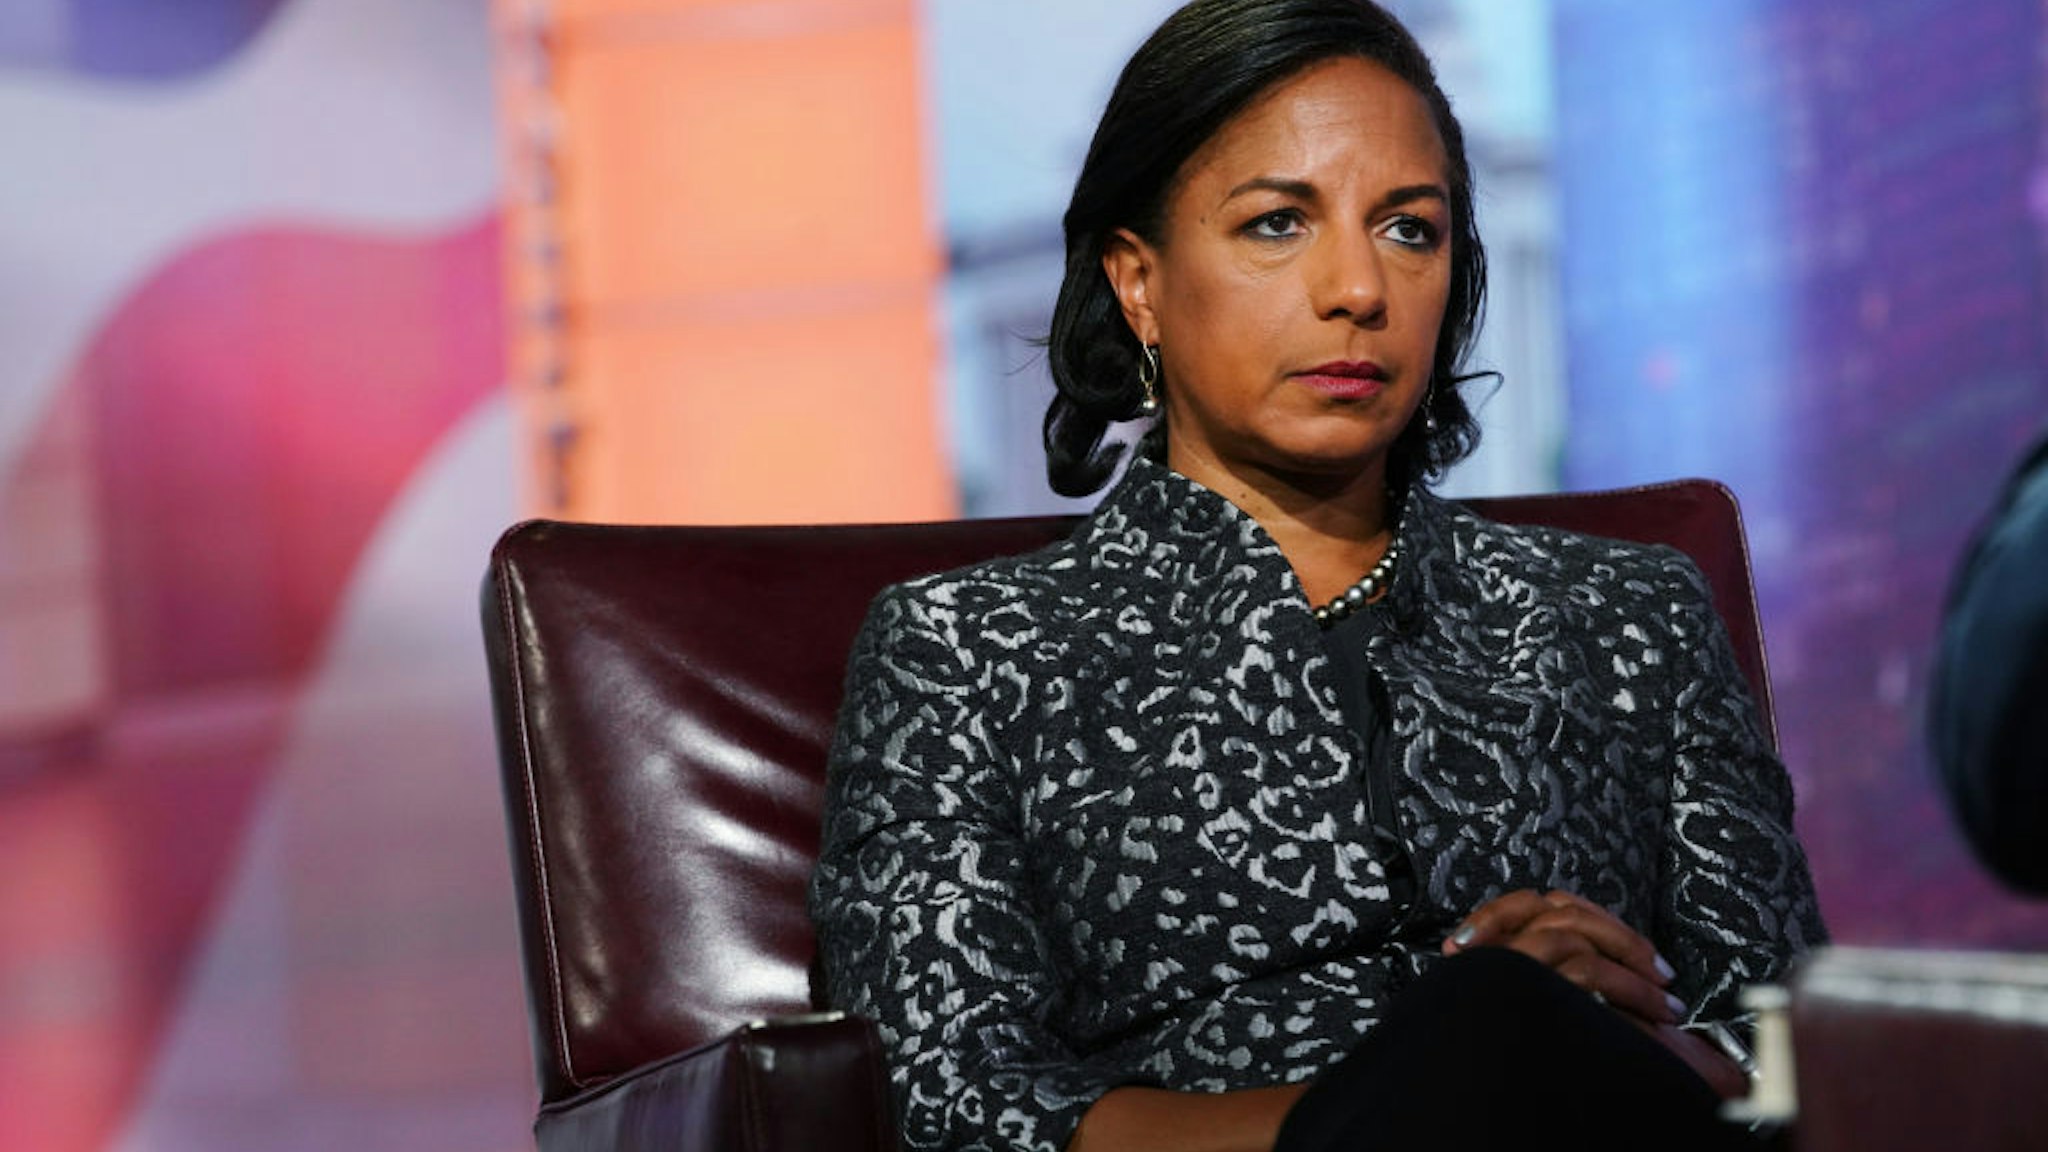 Susan Rice, former U.S. national security advisor, listens during a Bloomberg Television interview in New York, U.S., on Tuesday, Oct. 8, 2019.